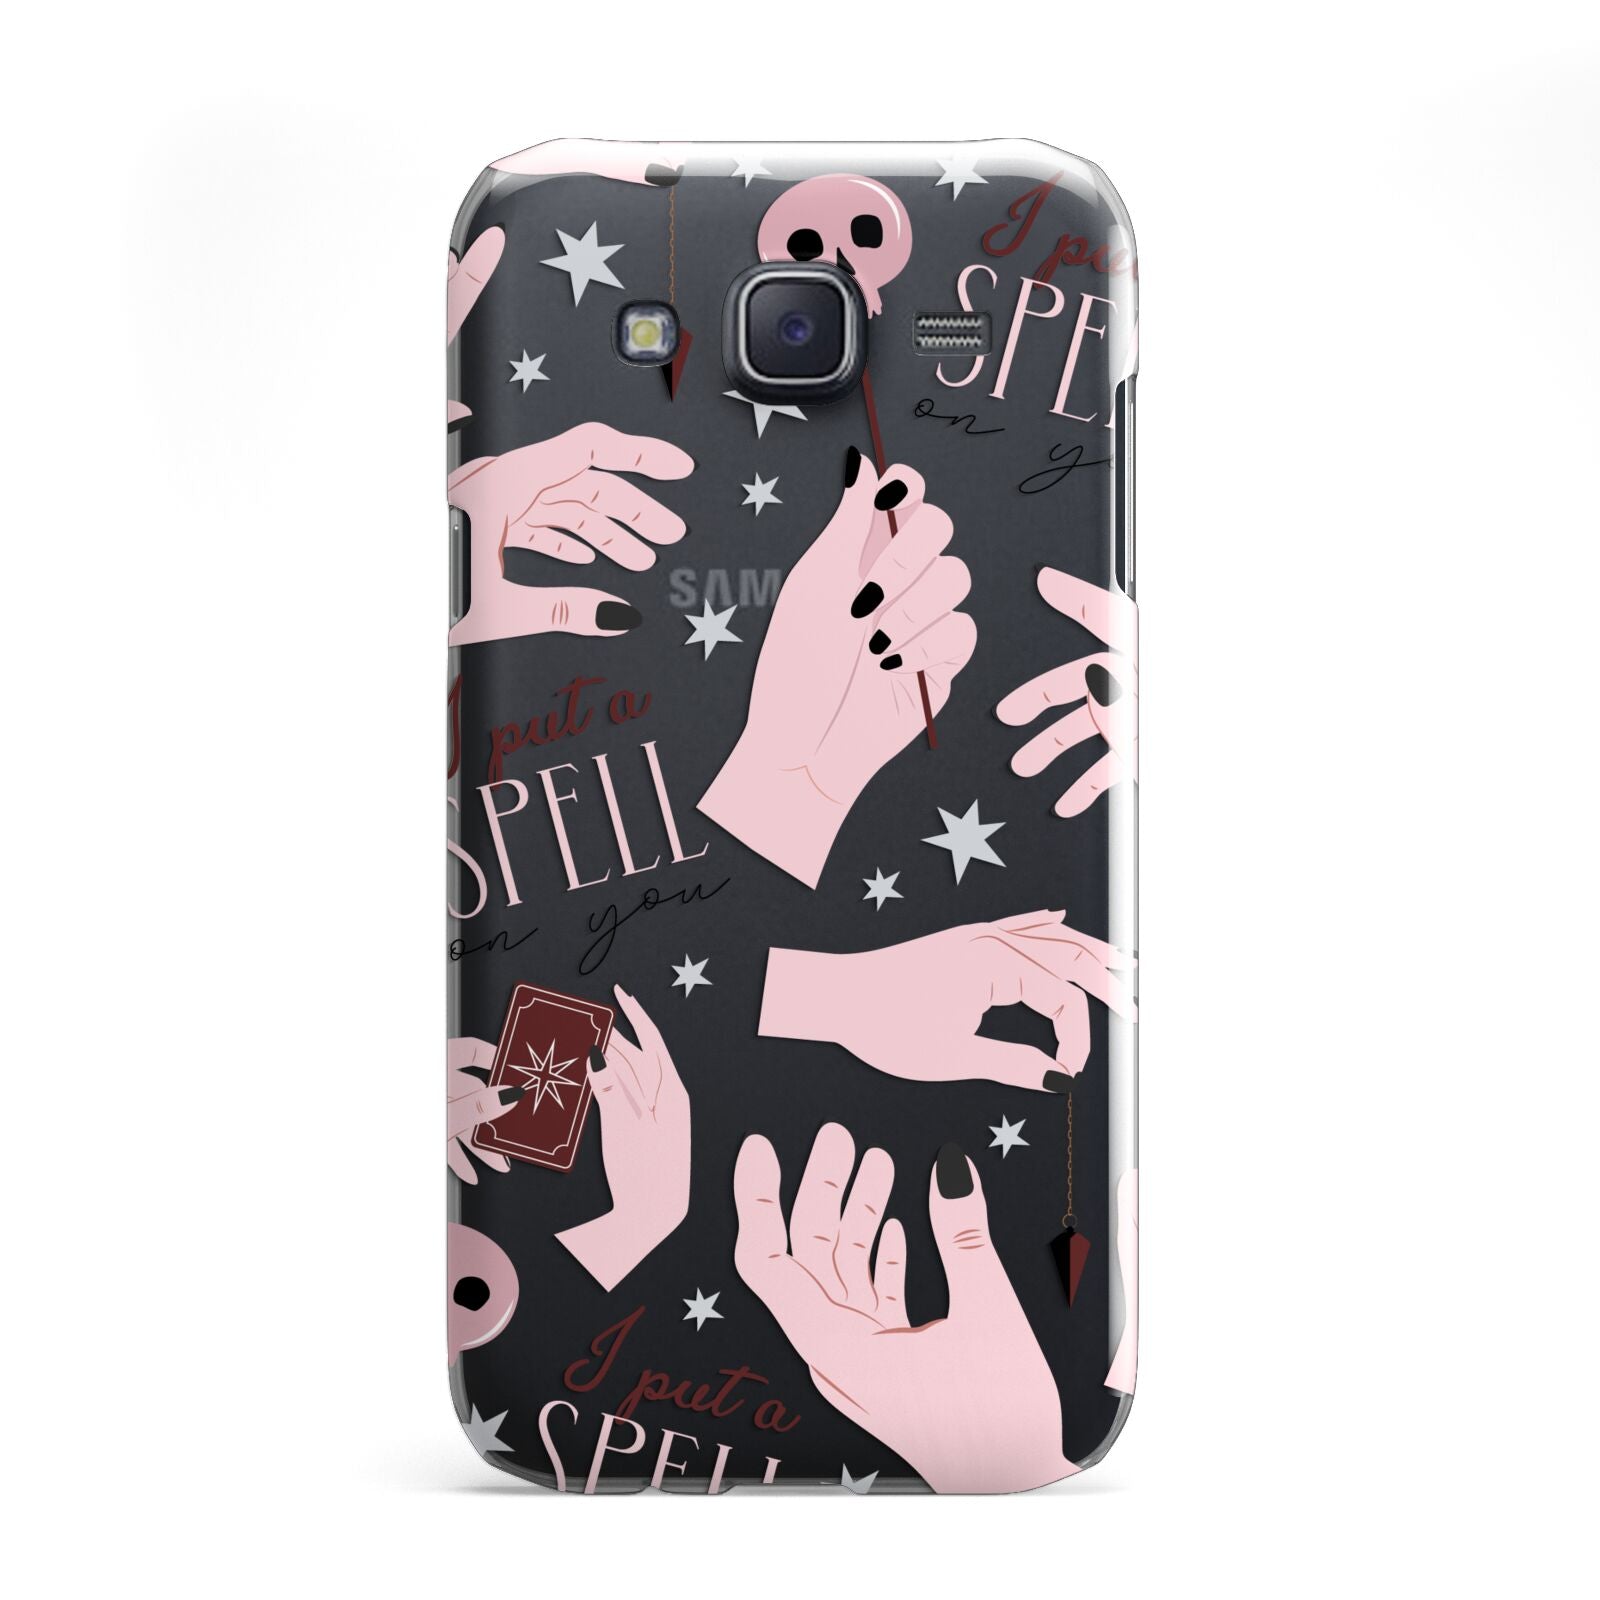 Witches Hands and Tarot Cards Samsung Galaxy J5 Case